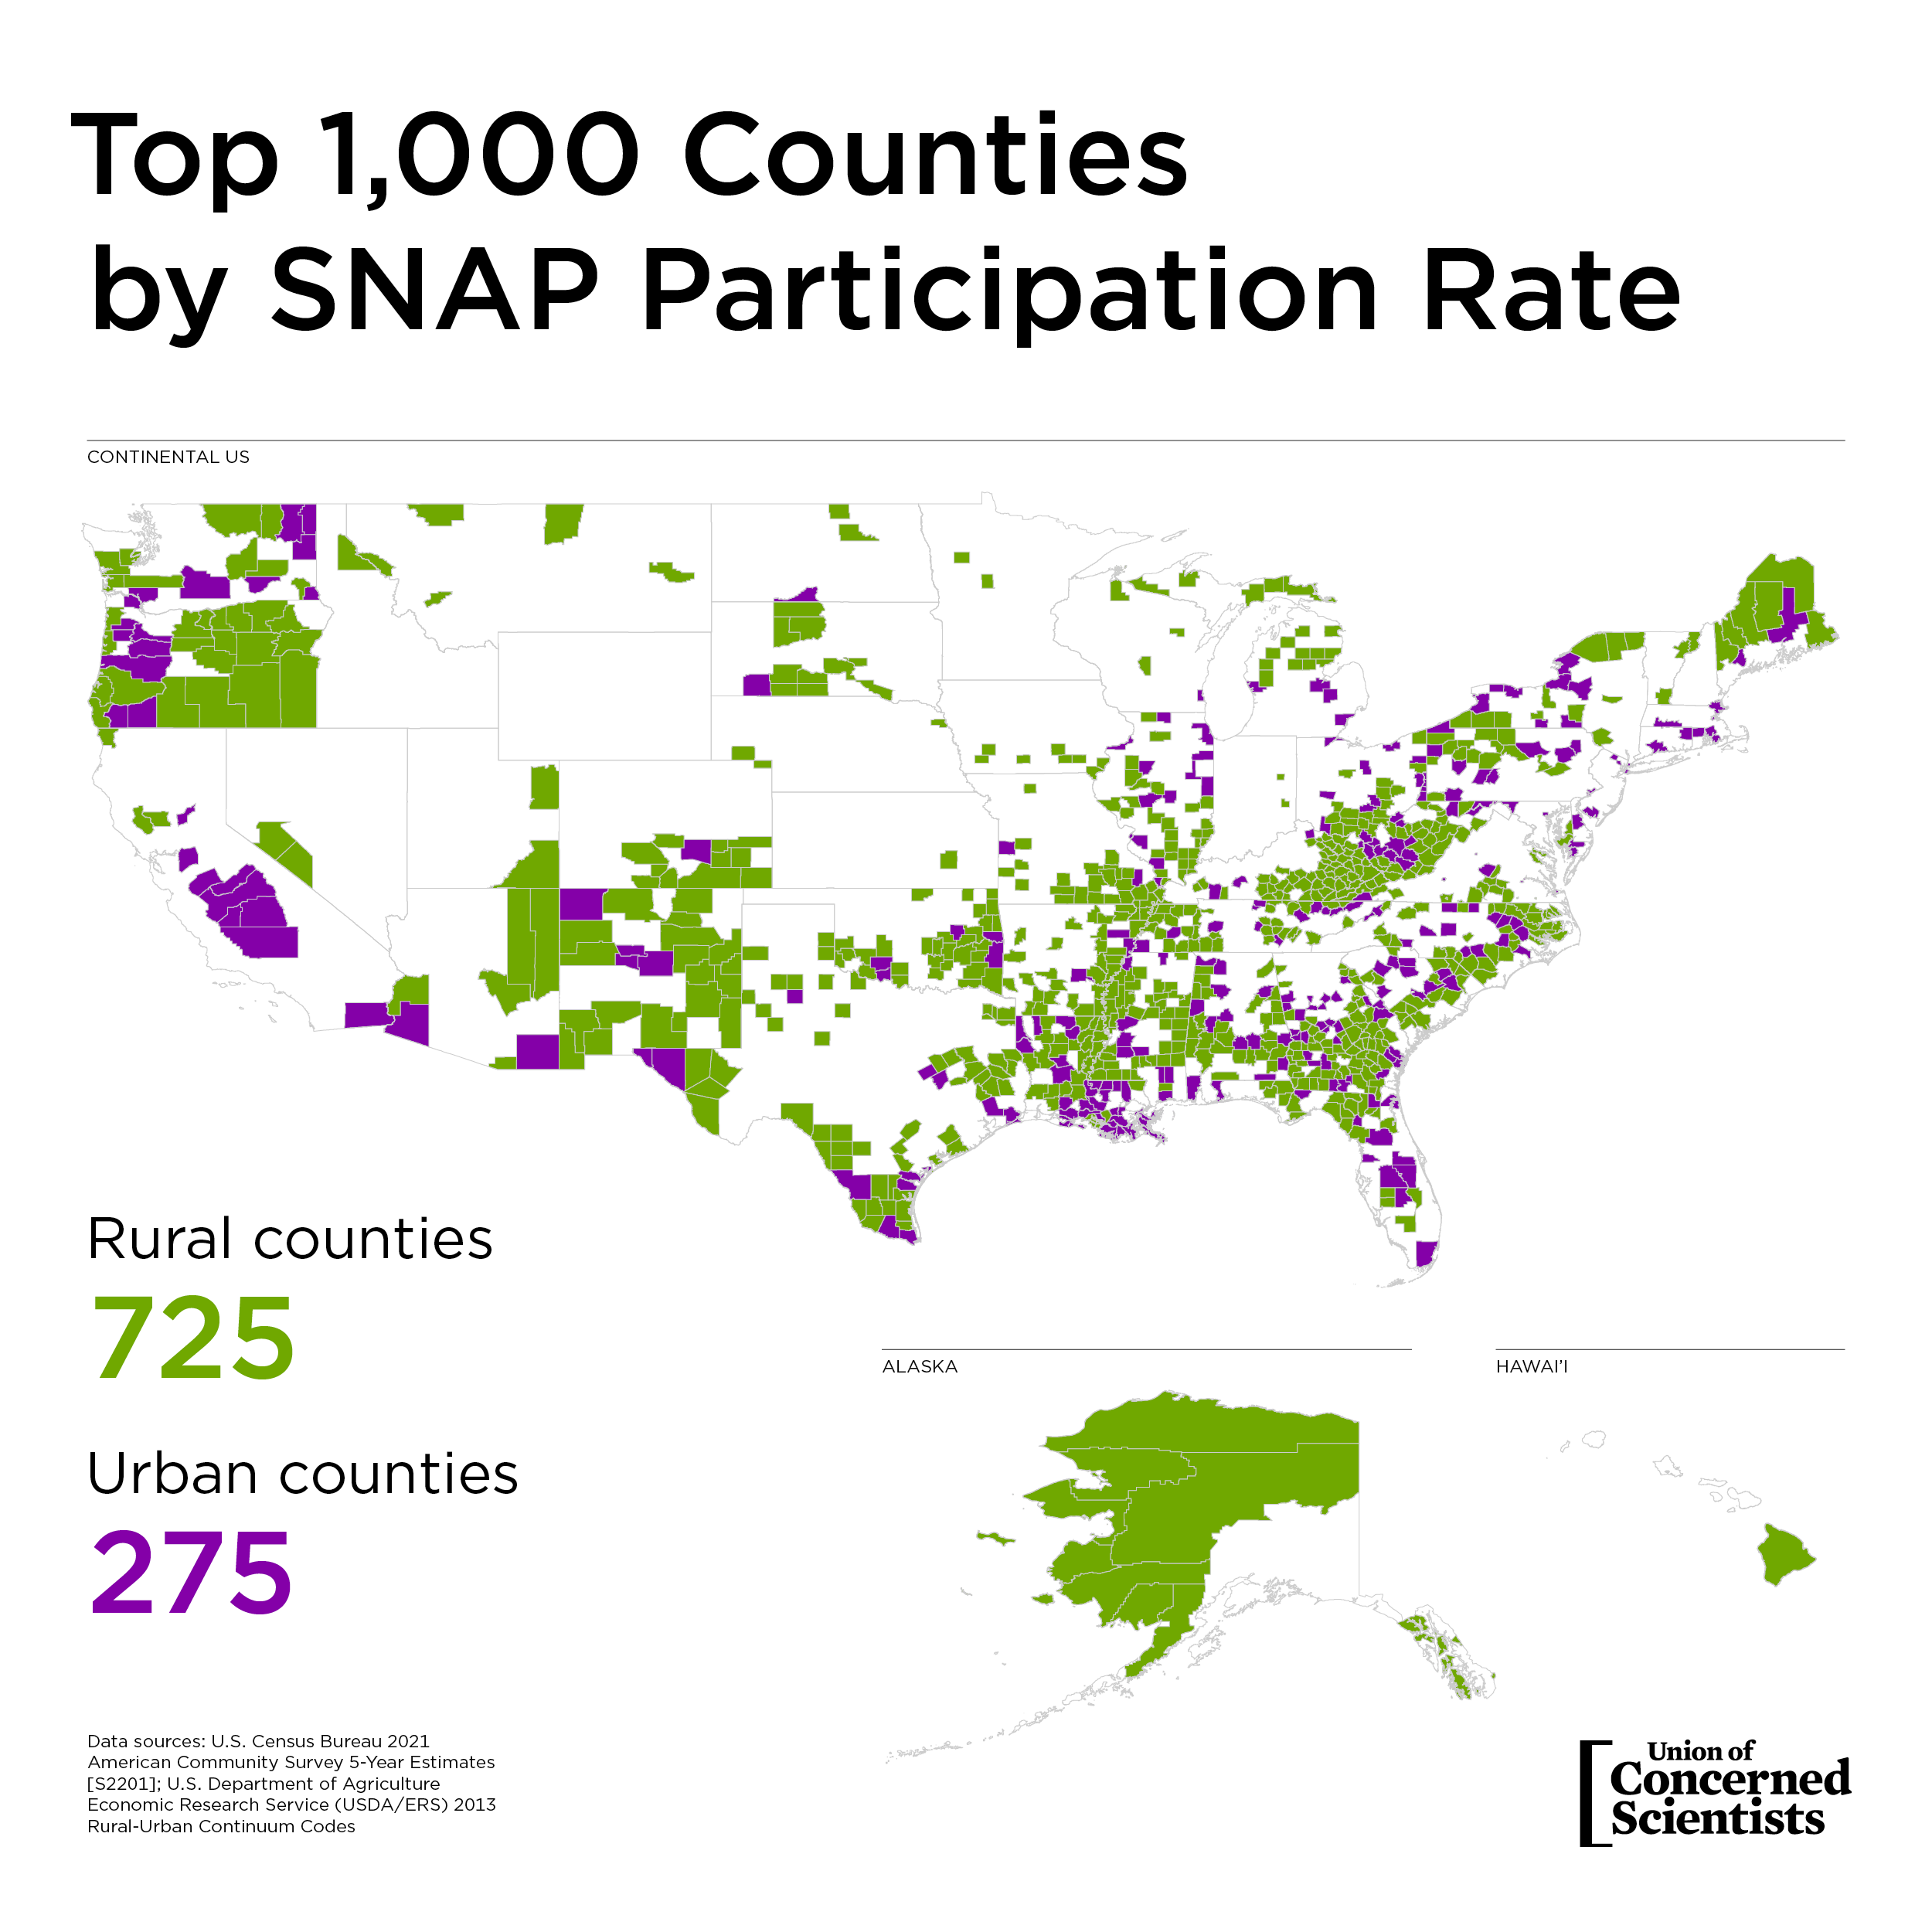 map of the United States showing the top 1,000 counties by SNAP participation rate; 725 of the counties are rural (shaded green) and 275 are urban (shaded purple)